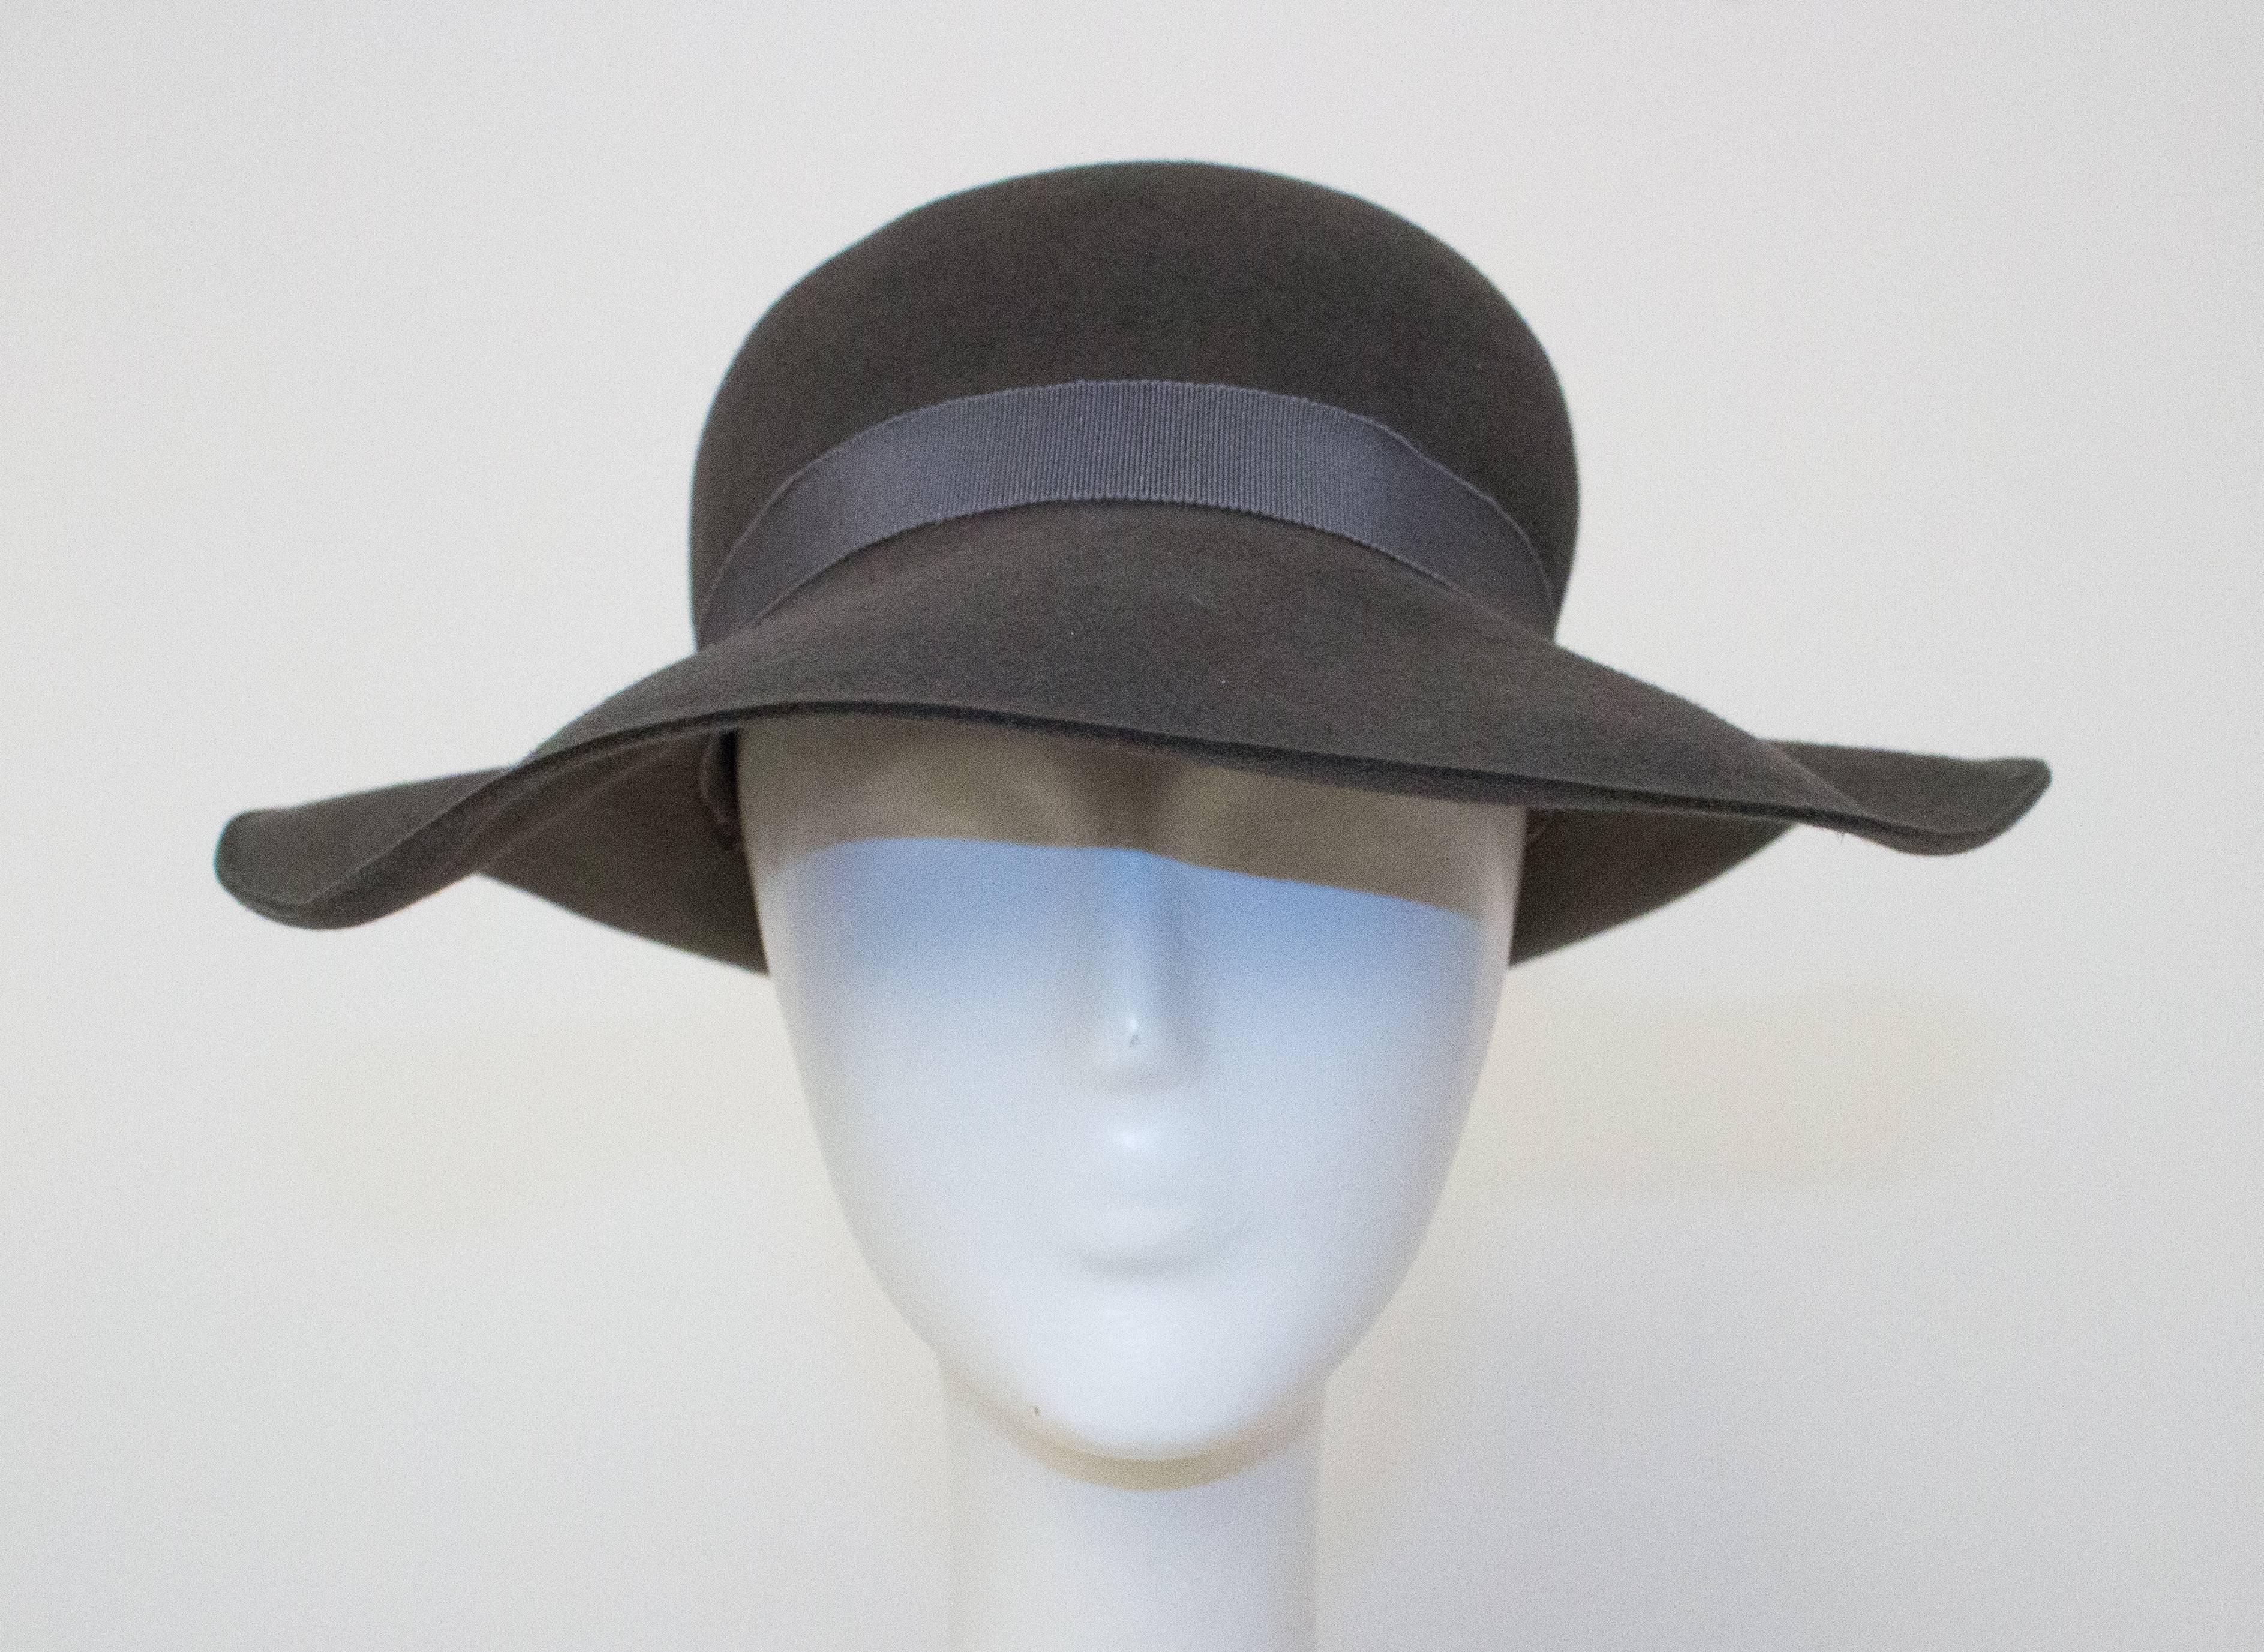 80s Giorgio Armani felt floppy hat. Extremely soft. Gros grain interior and exterior band. 

Measurements

21 1/2" circumference 
2 3/4" - 3 1/2" wide band 